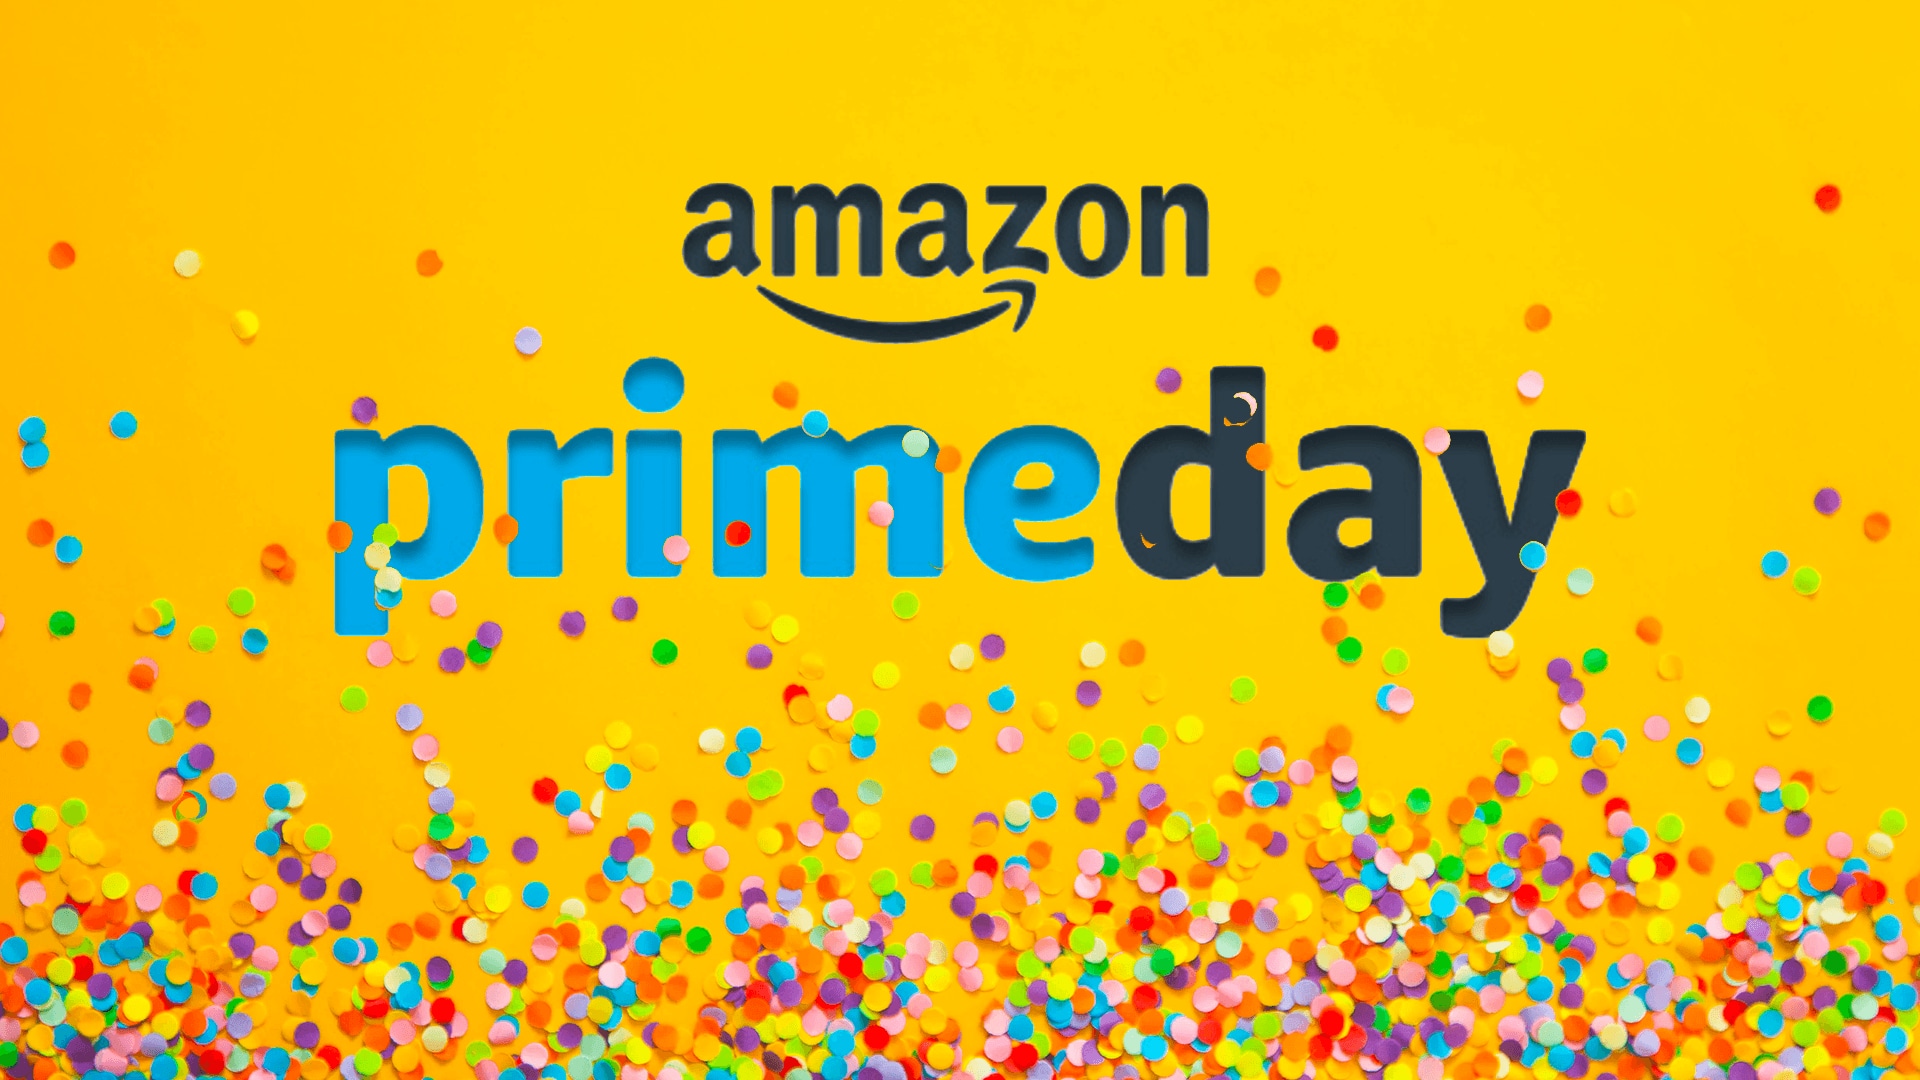 Prime Day 2021 When: Amazon offers official dates